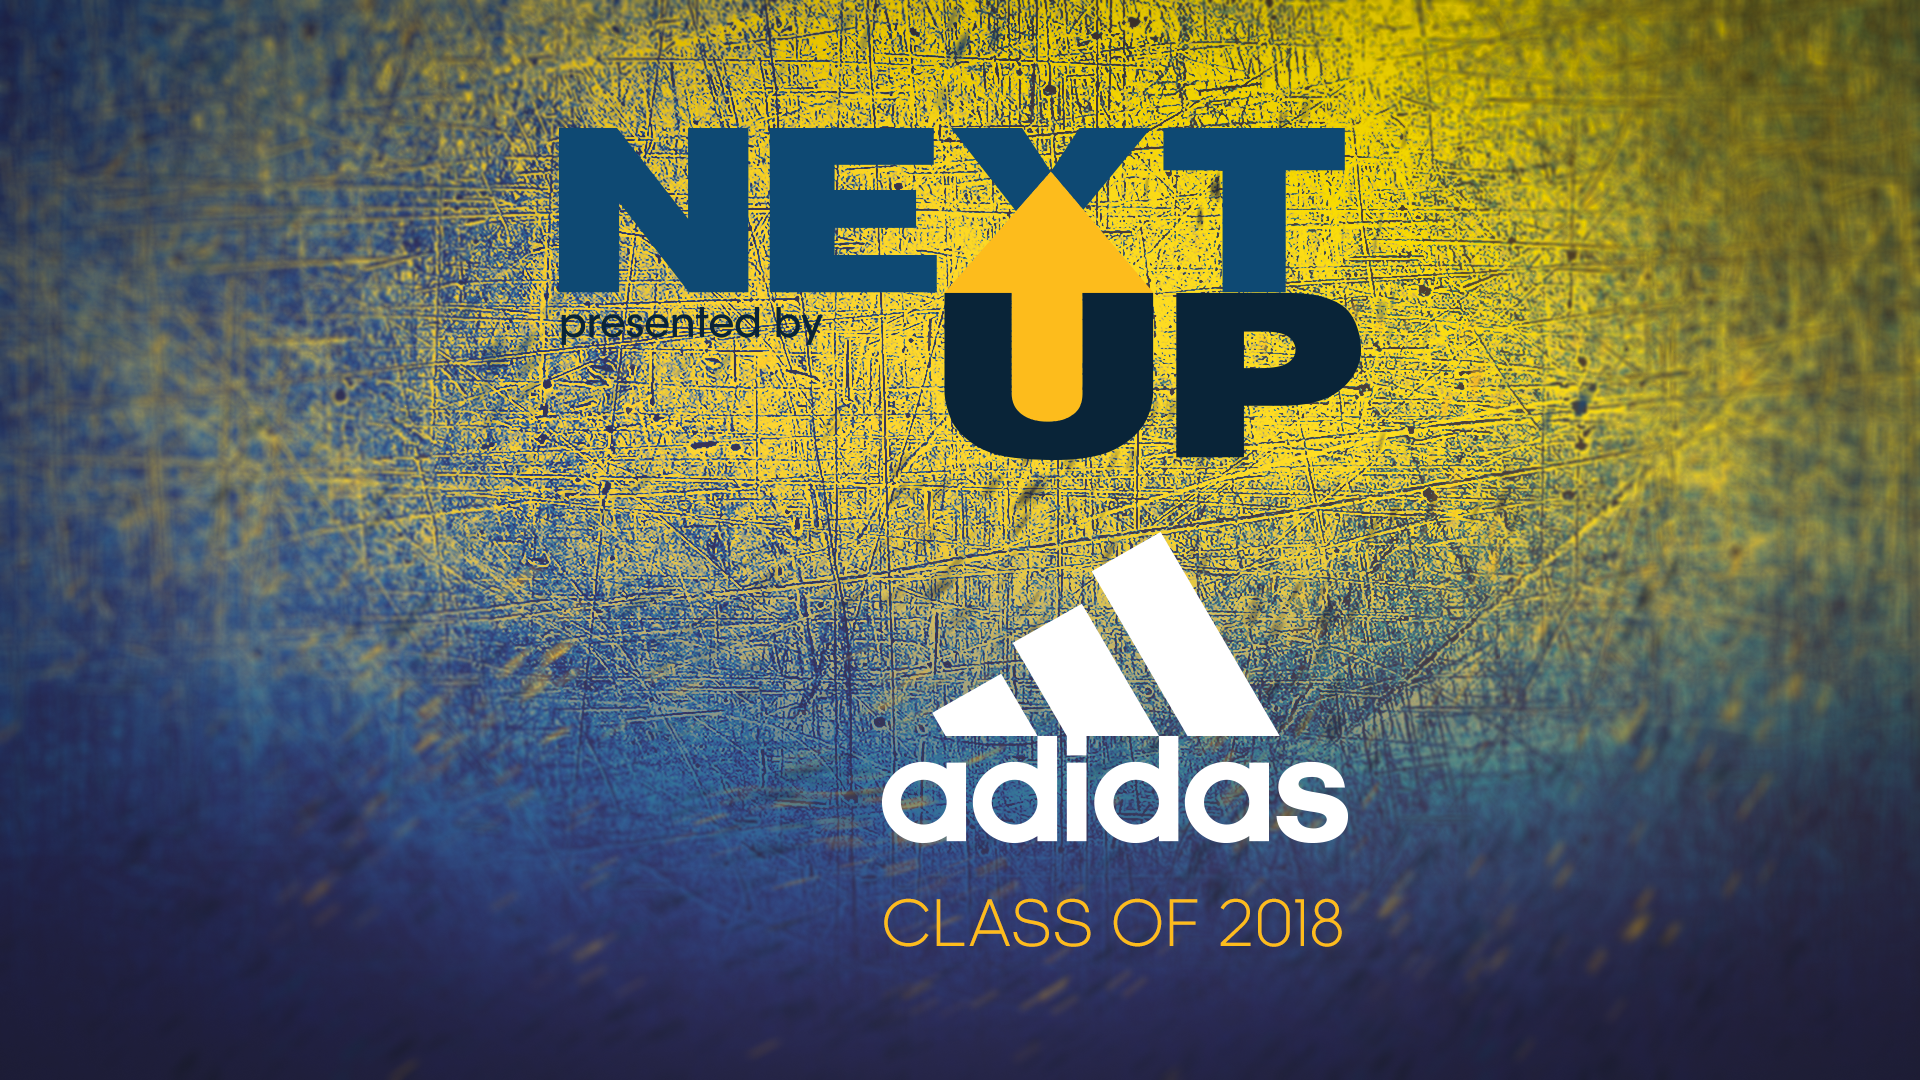 next up presented by adidas